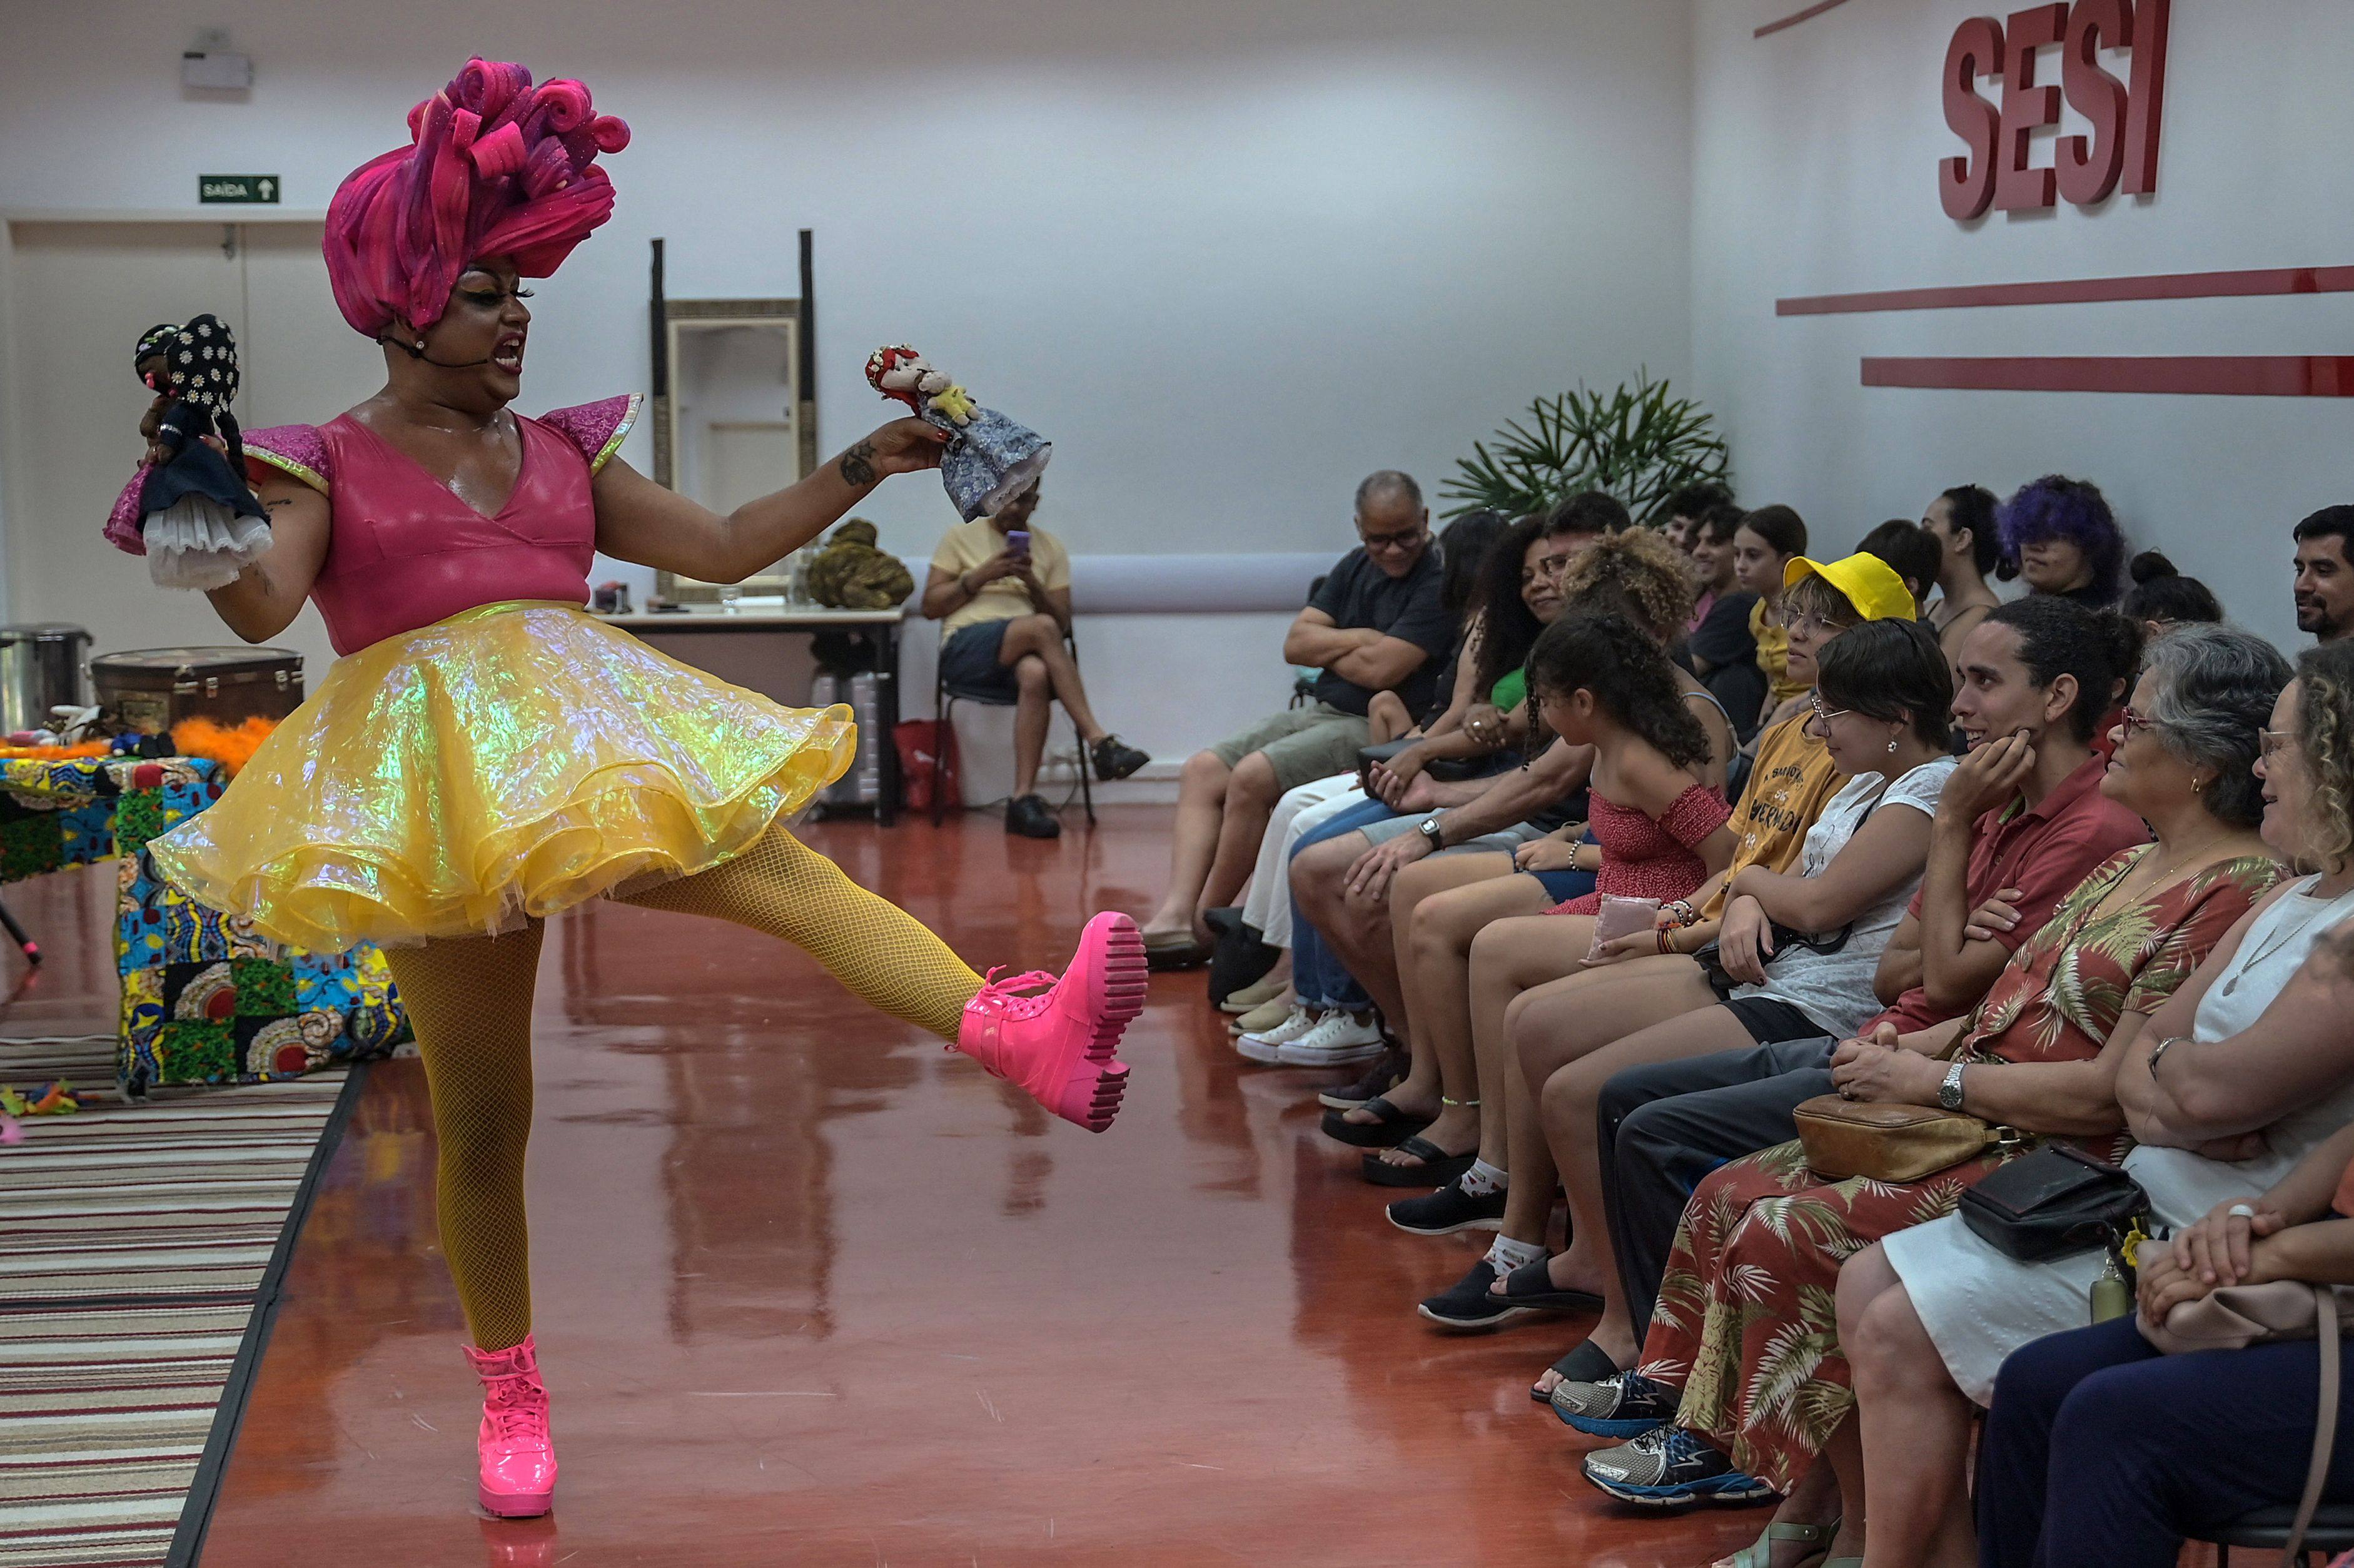 Brazilian drag queen Paulo Reis, known as Helena Black, performs at the SESI theatre in Sao Jose dos Campos in Brazil. Photo: AFP